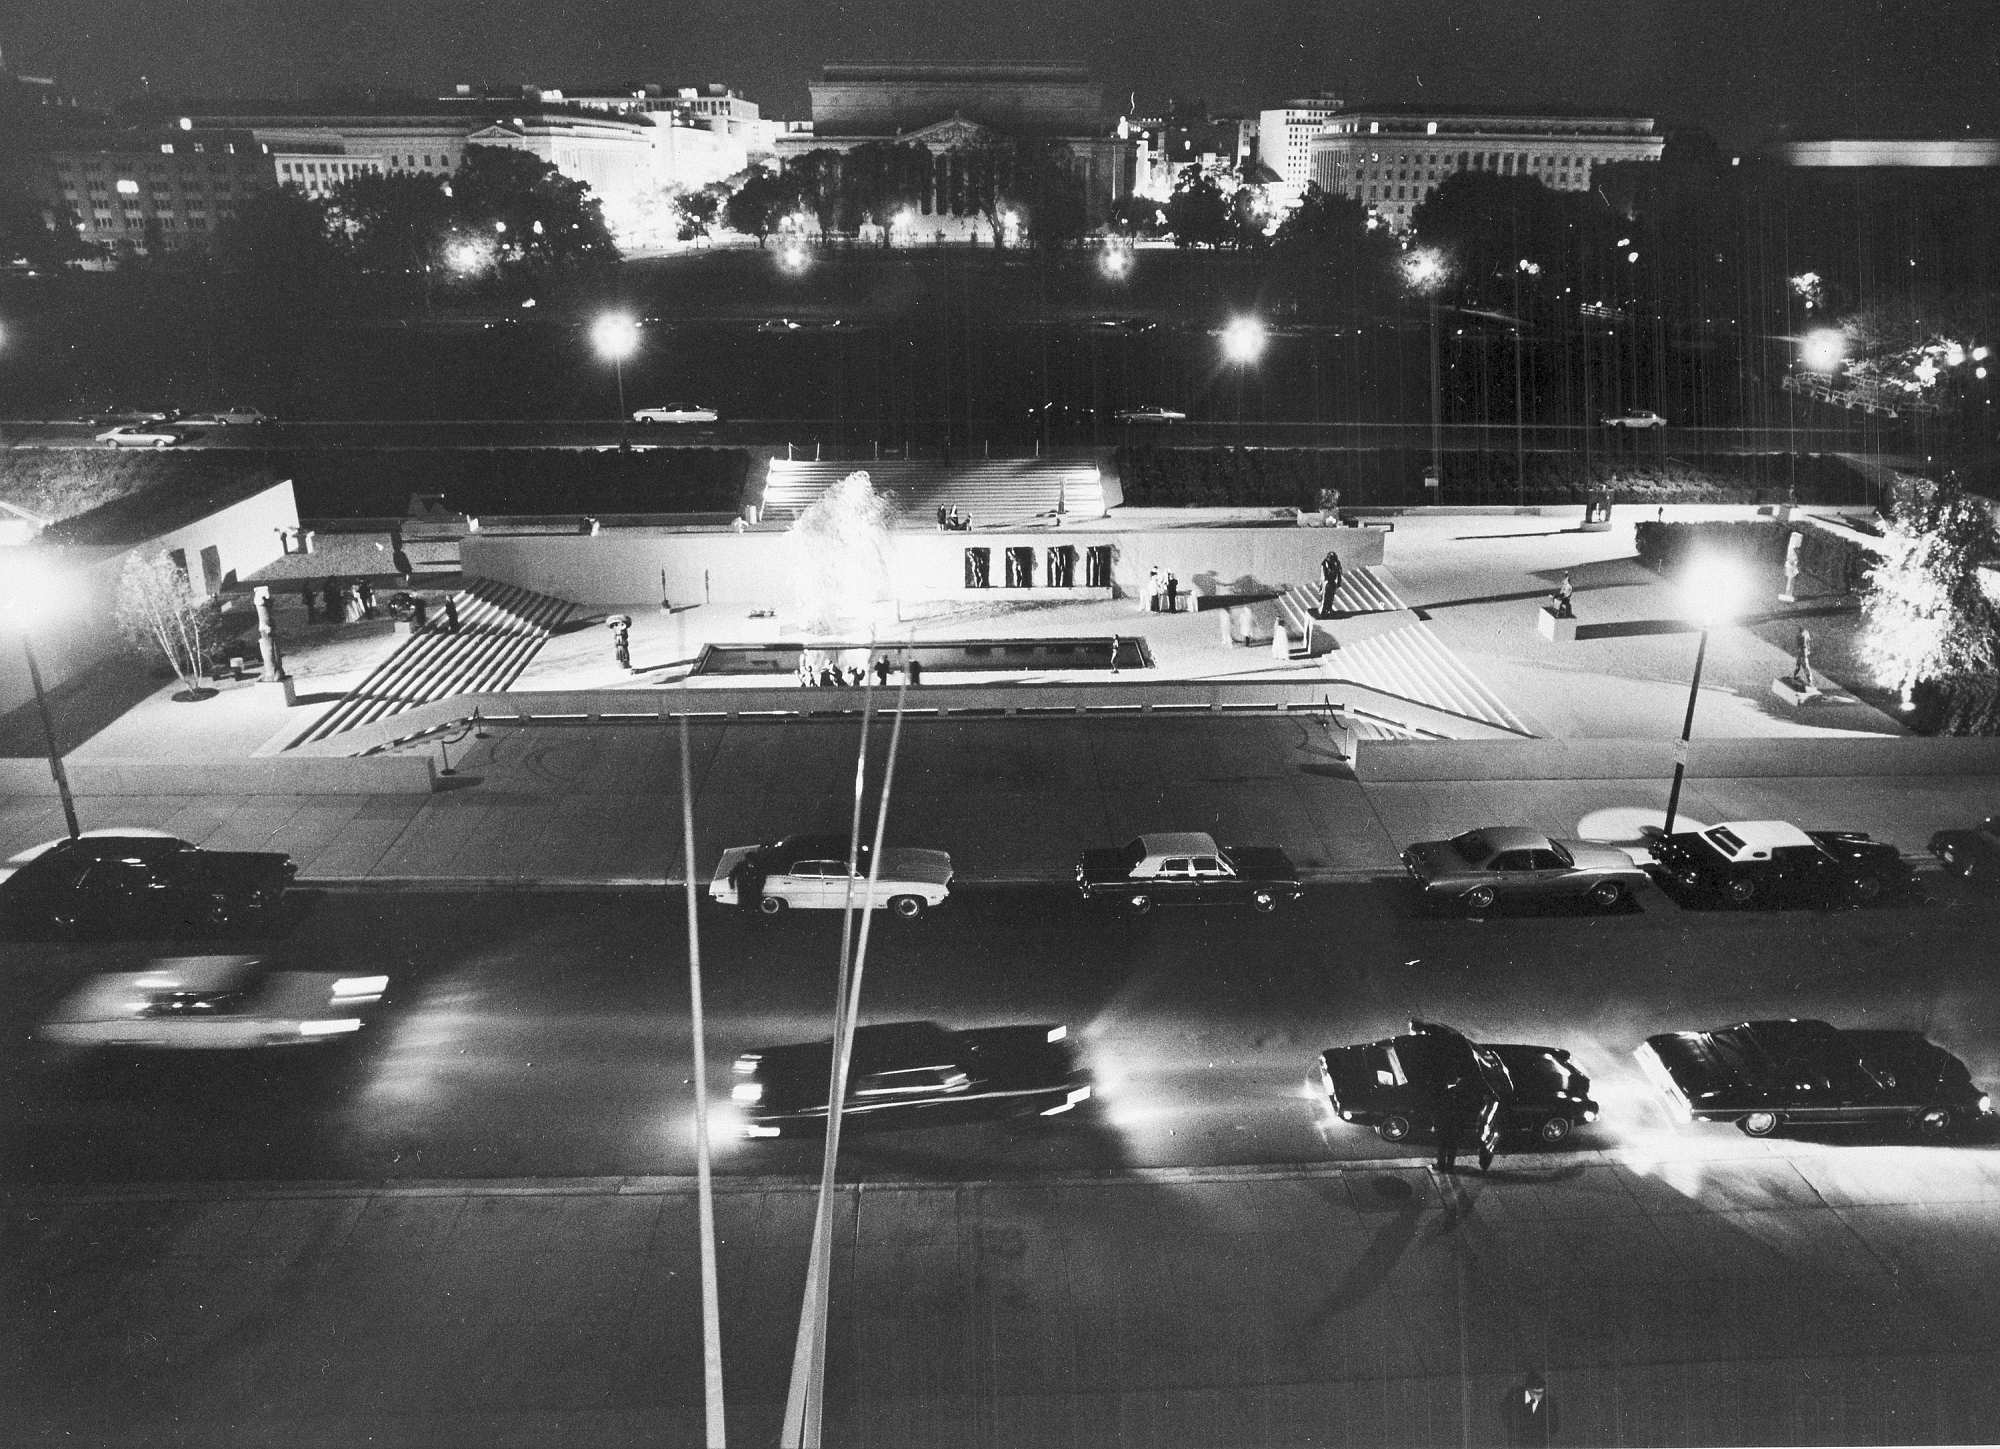 Hirshhorn Museum on Opening Night, October 4, 1974. Historic Images of the Smithsonian, Smithsonian Institution Archives, Image #94-2860.